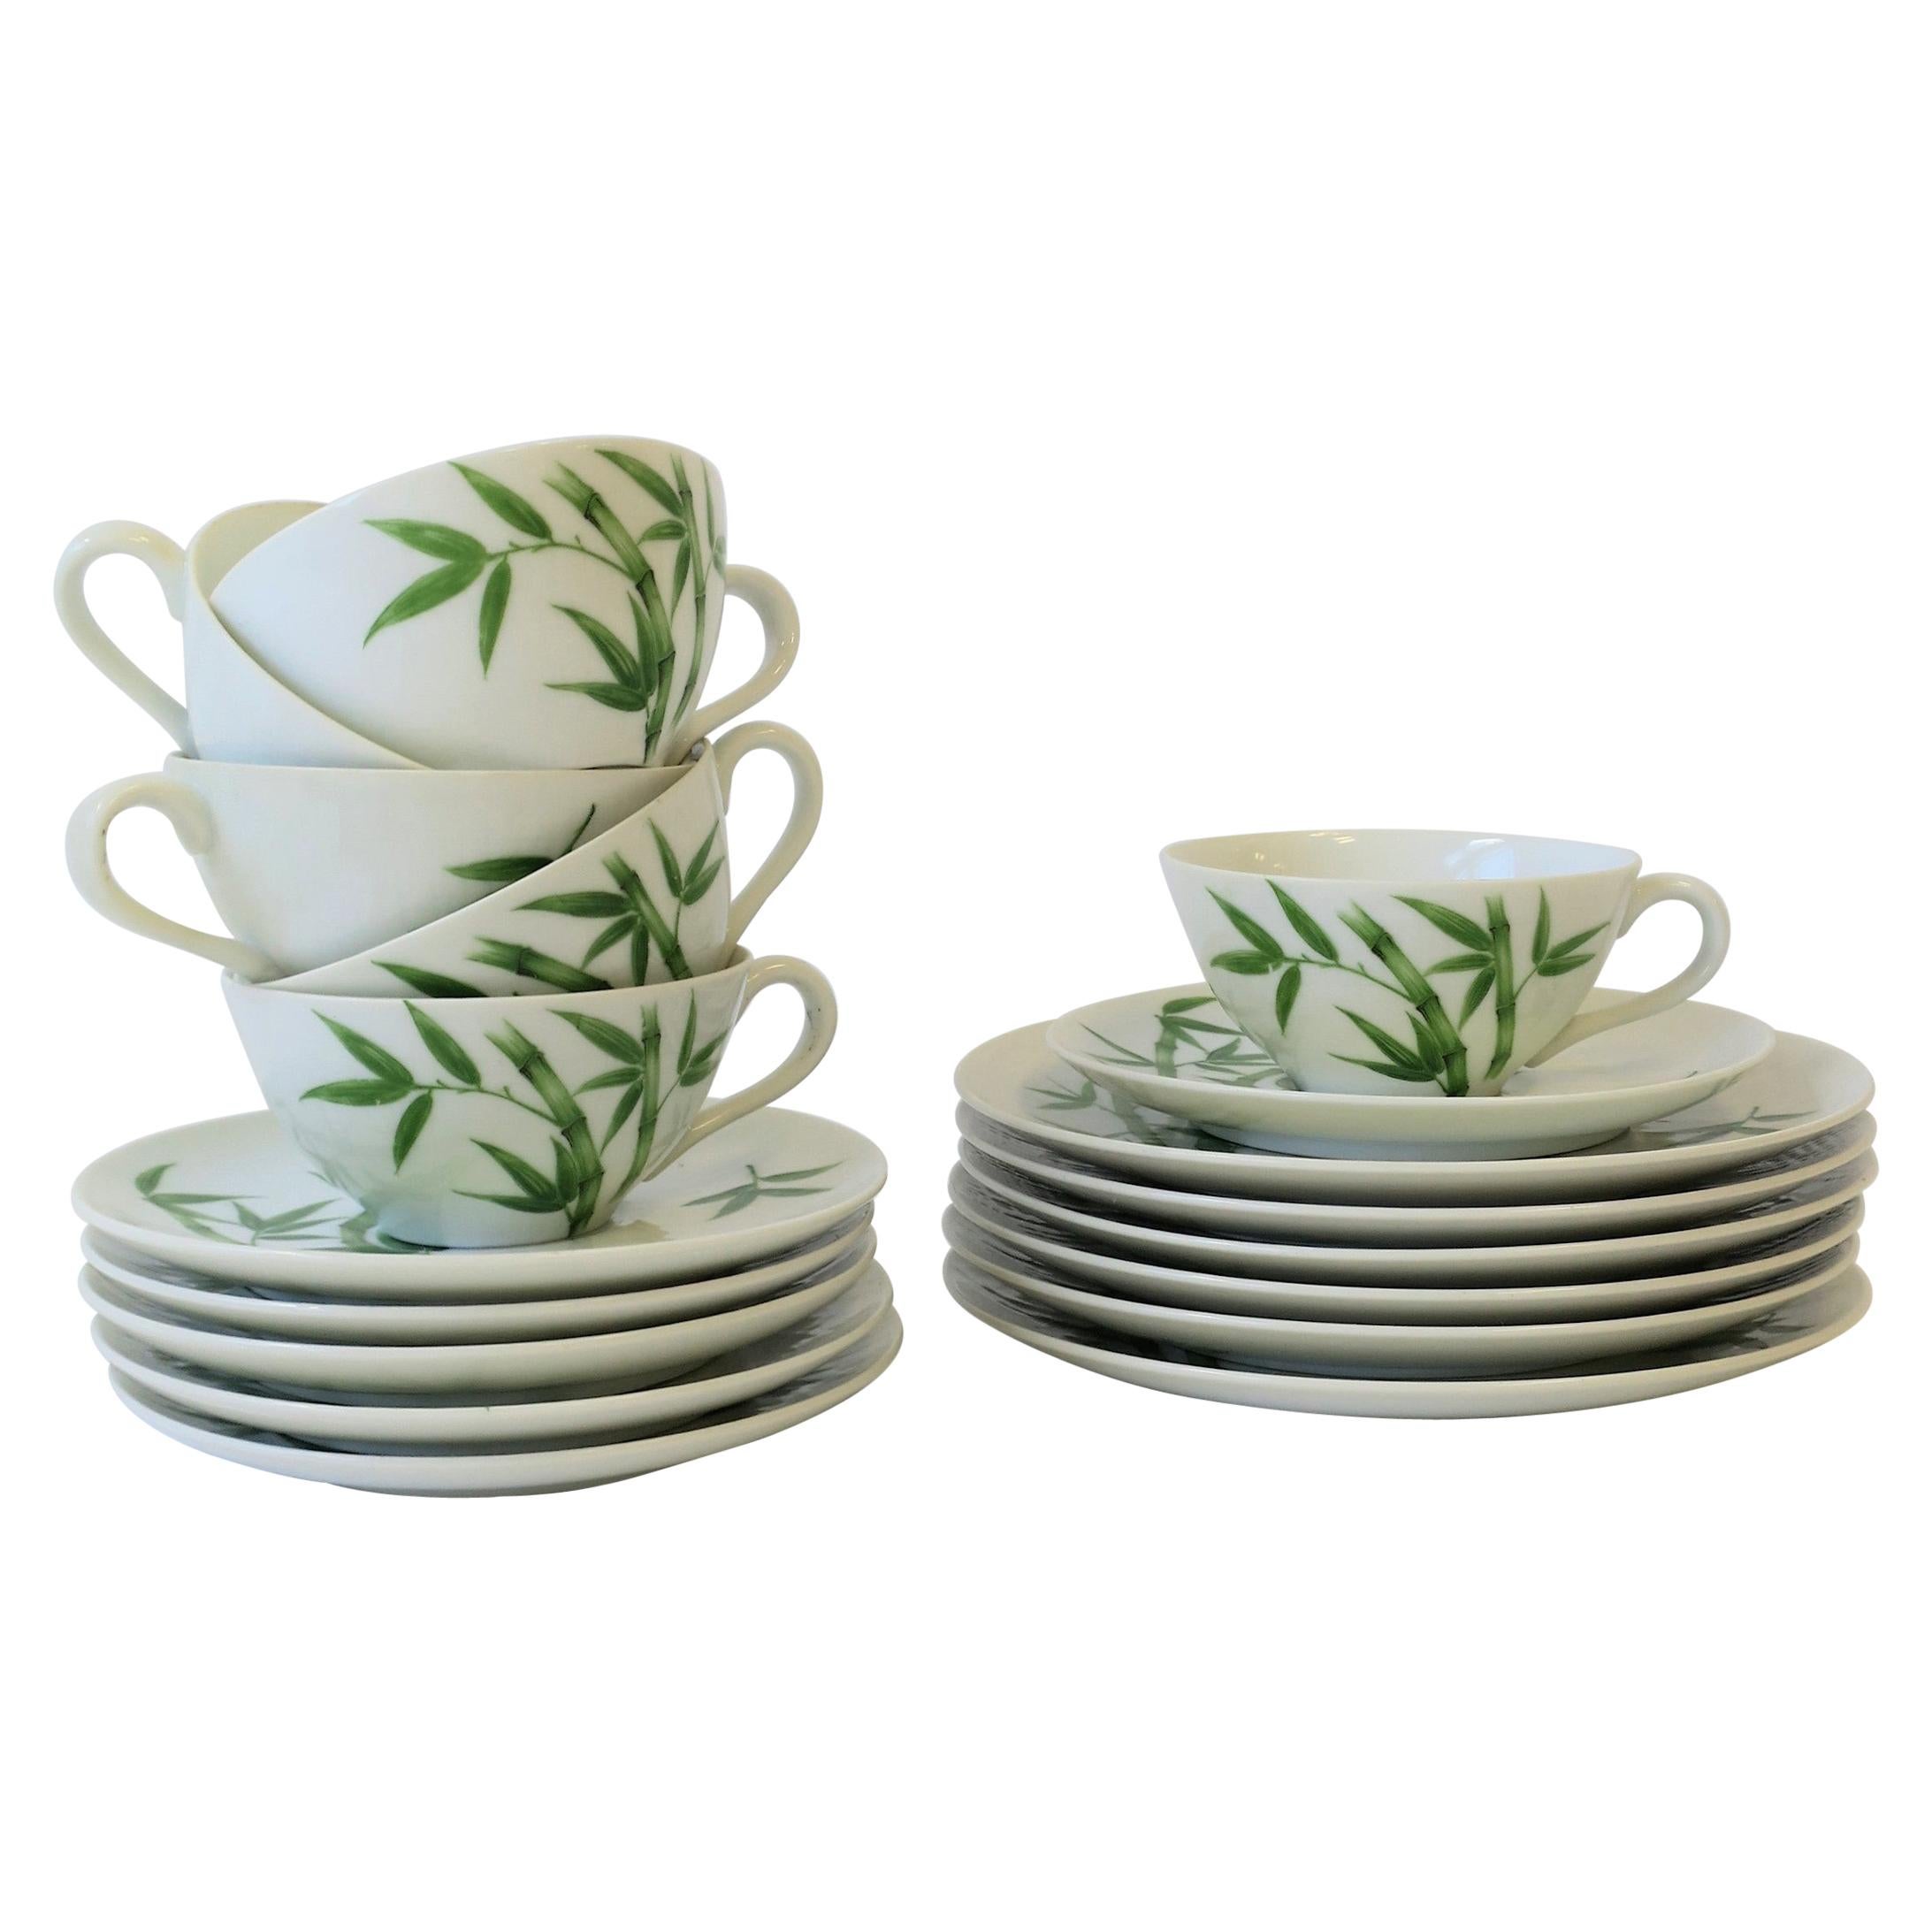 Bamboo White & Green Porcelain Lunch Dessert Tea/Coffee Dining Set of 6